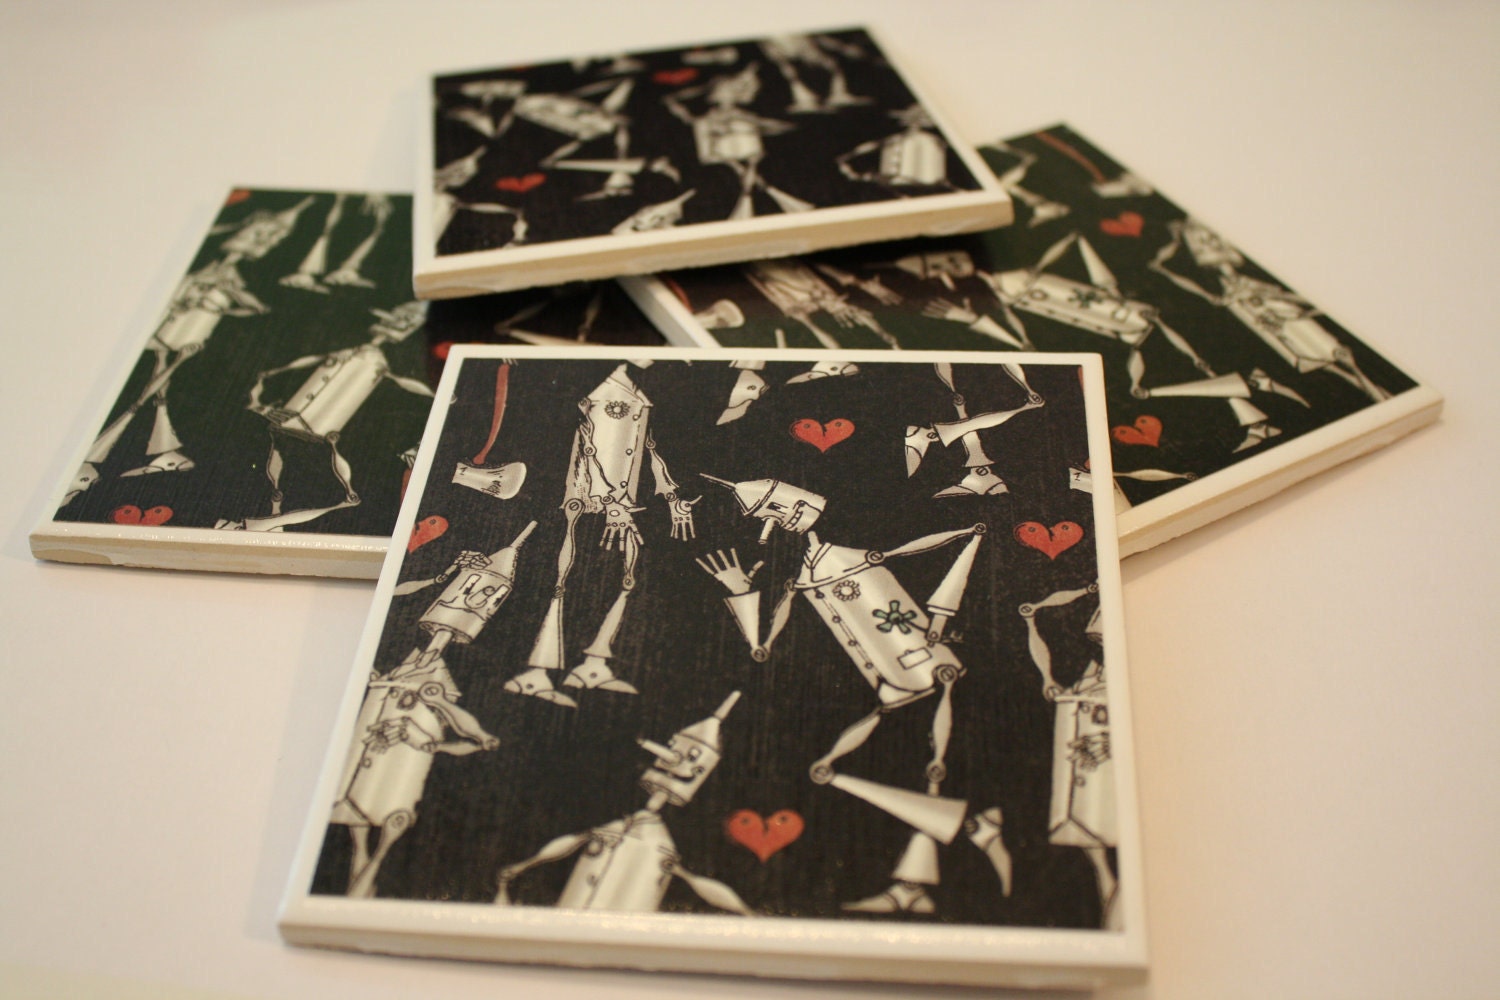 If I Only Had A Heart - Handmade Coasters - Set of 4